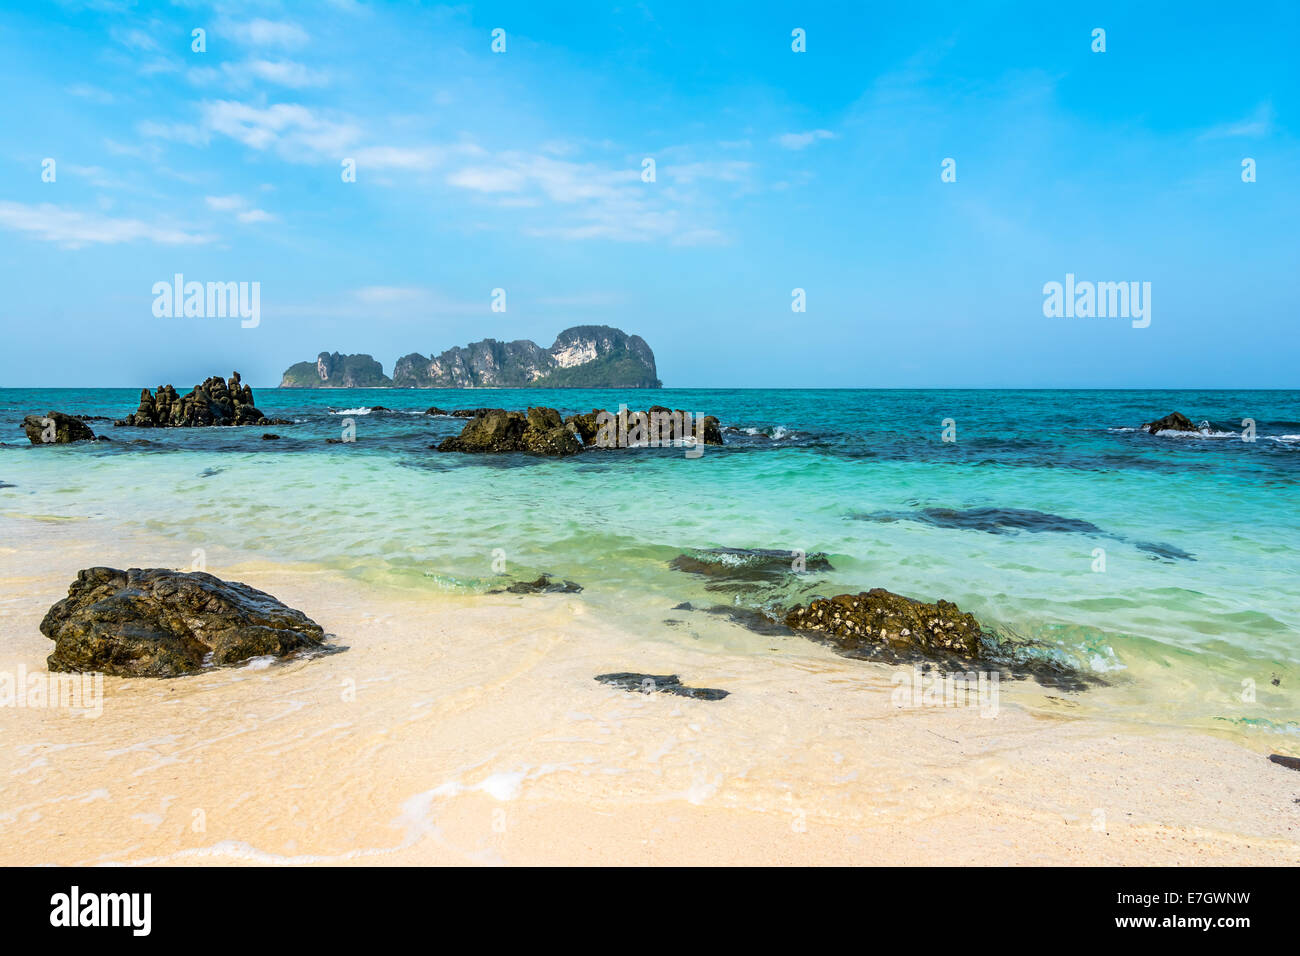 Seaside beach in Thailand, Asia. Blue sky and white sand at Bamboo Island, Thailand Stock Photo